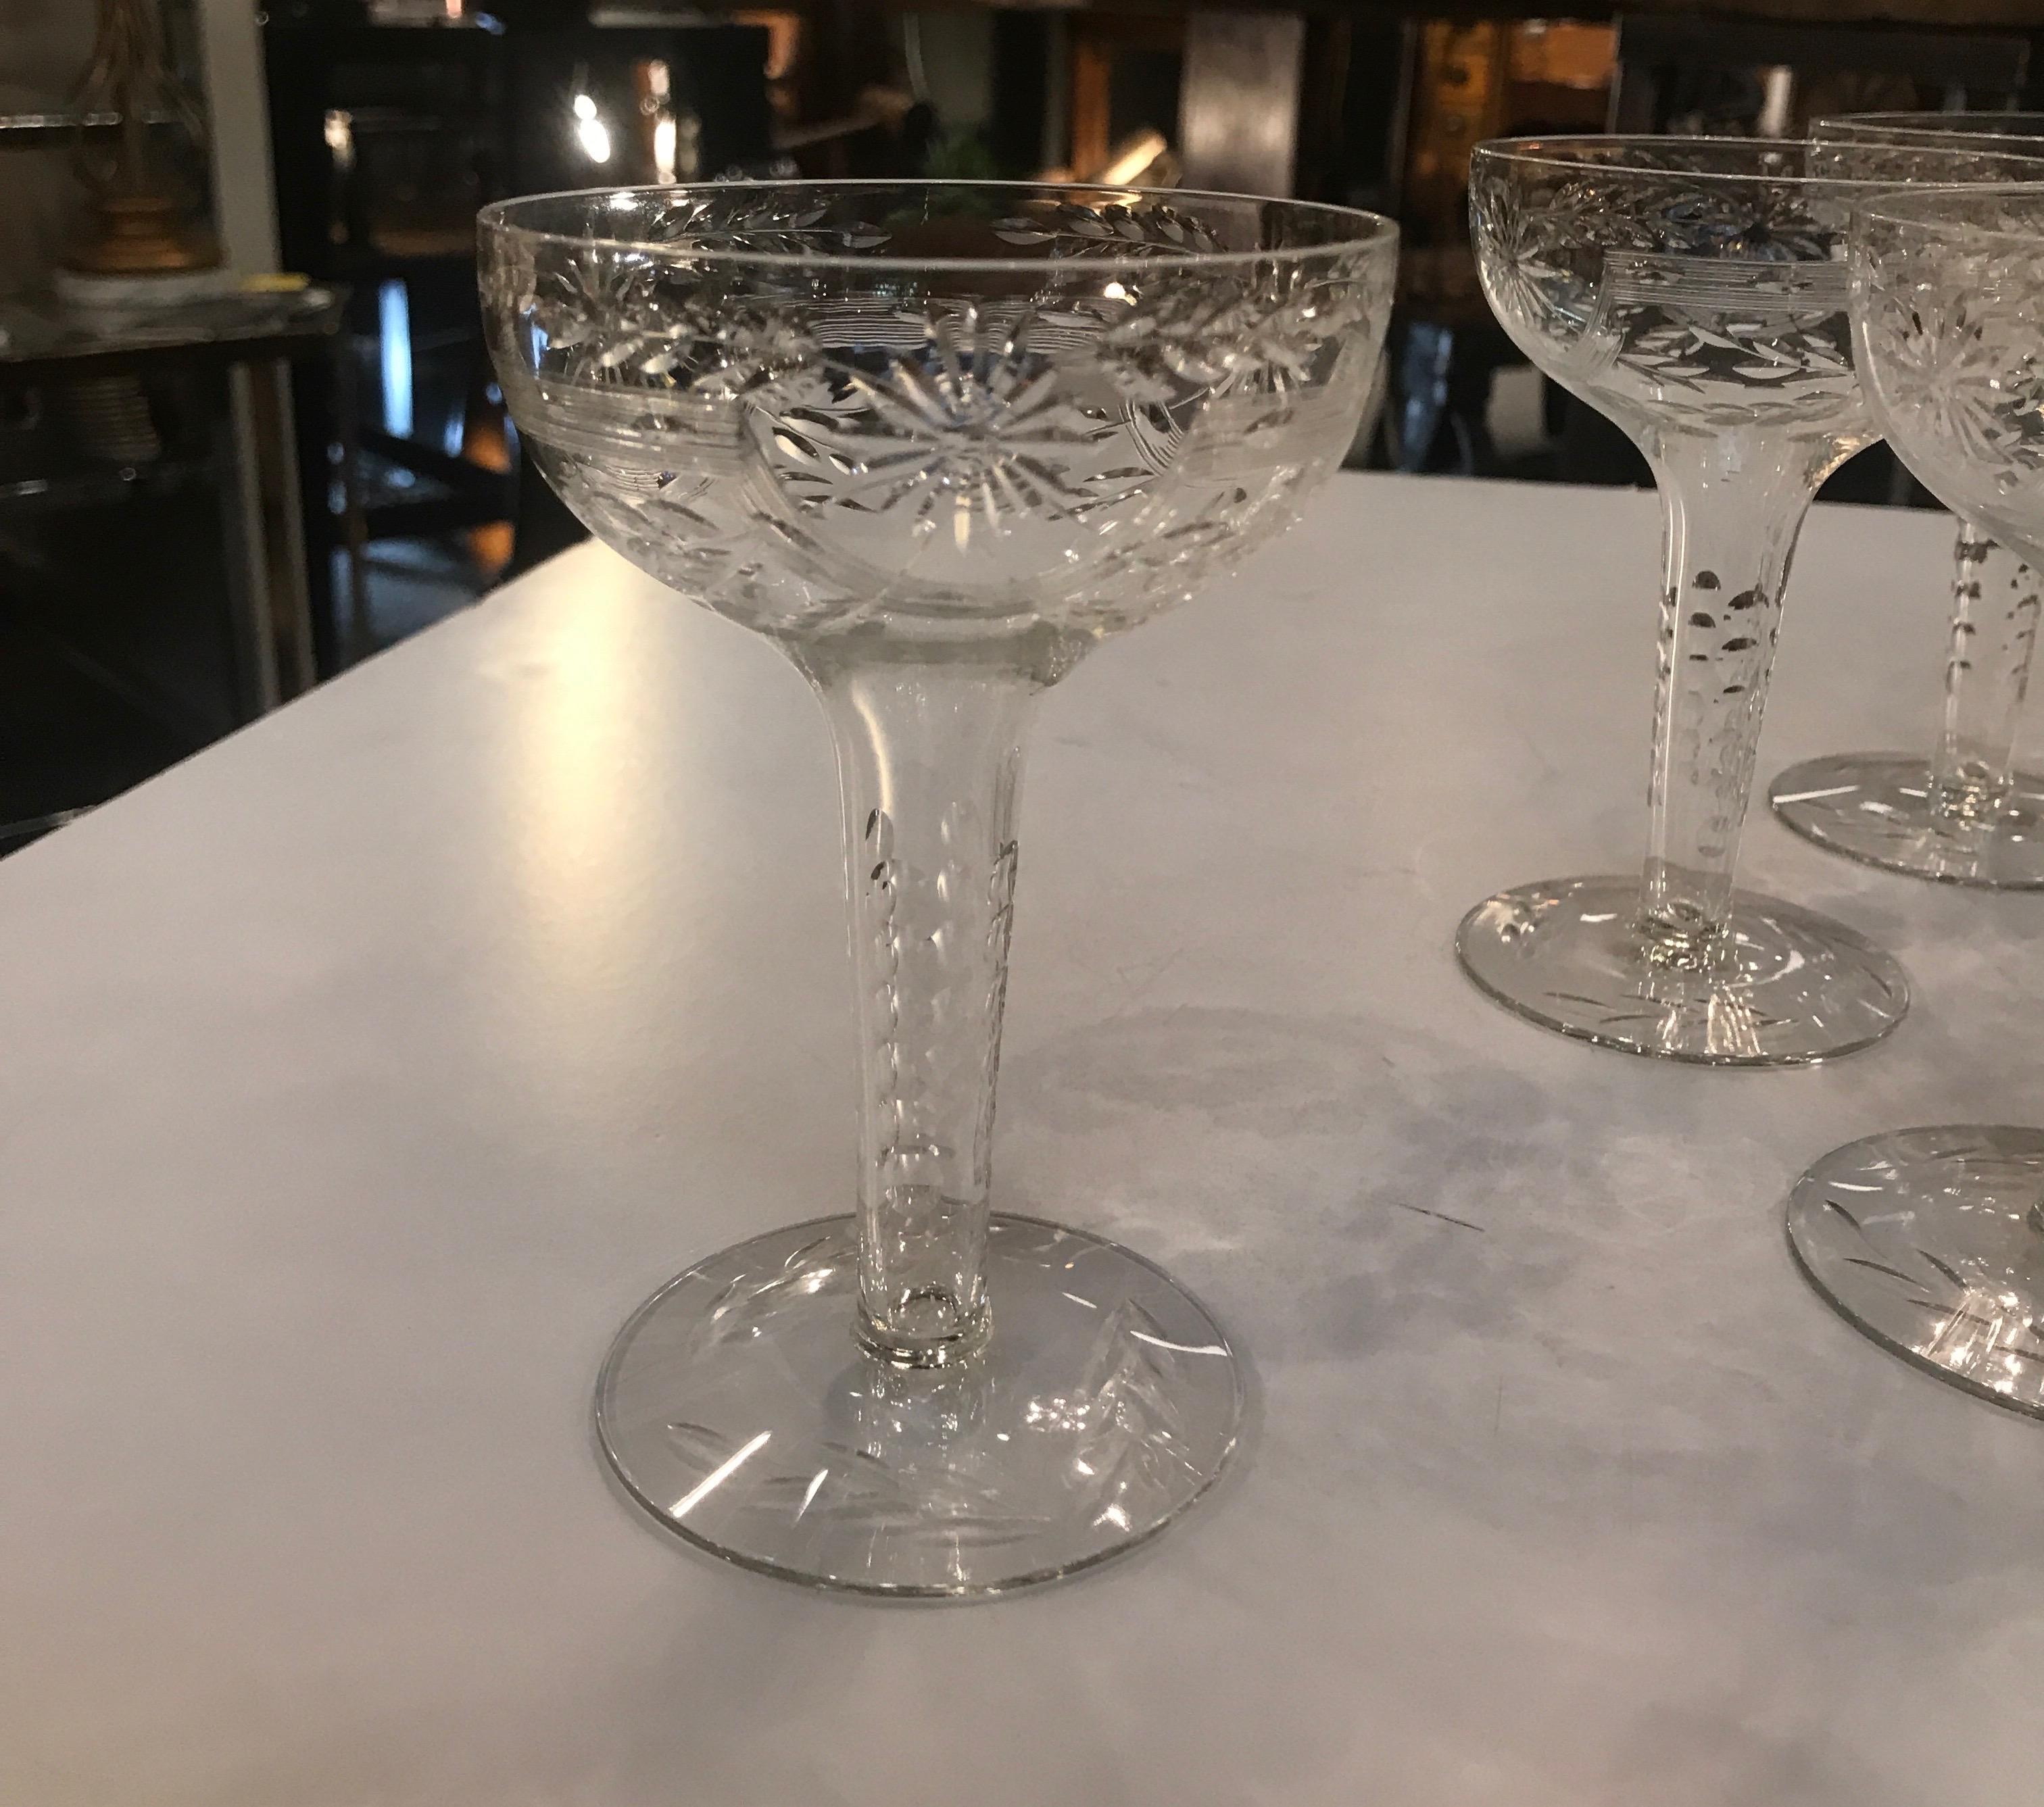 A set of 12 hand engraved champagne coupes with hollow stems, the delicate pattern on the bowls, stems and base, English, early 20th century, circa 1910. Downton Abby at its finest!